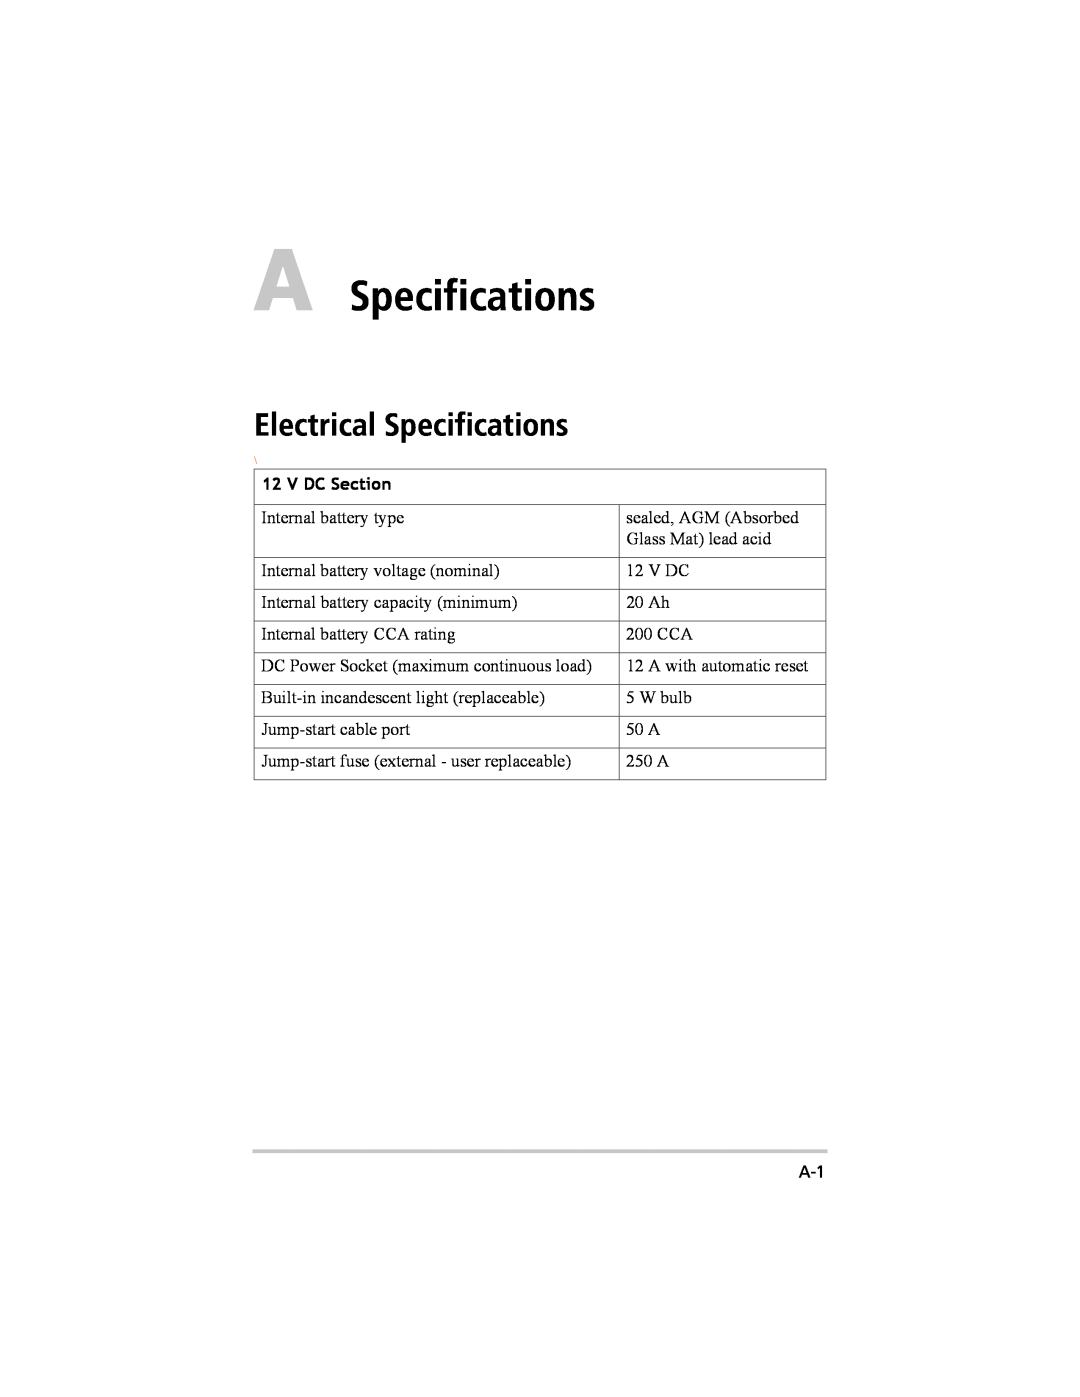 Xantrex Technology 200 manual A Specifications, Electrical Specifications, V DC Section 